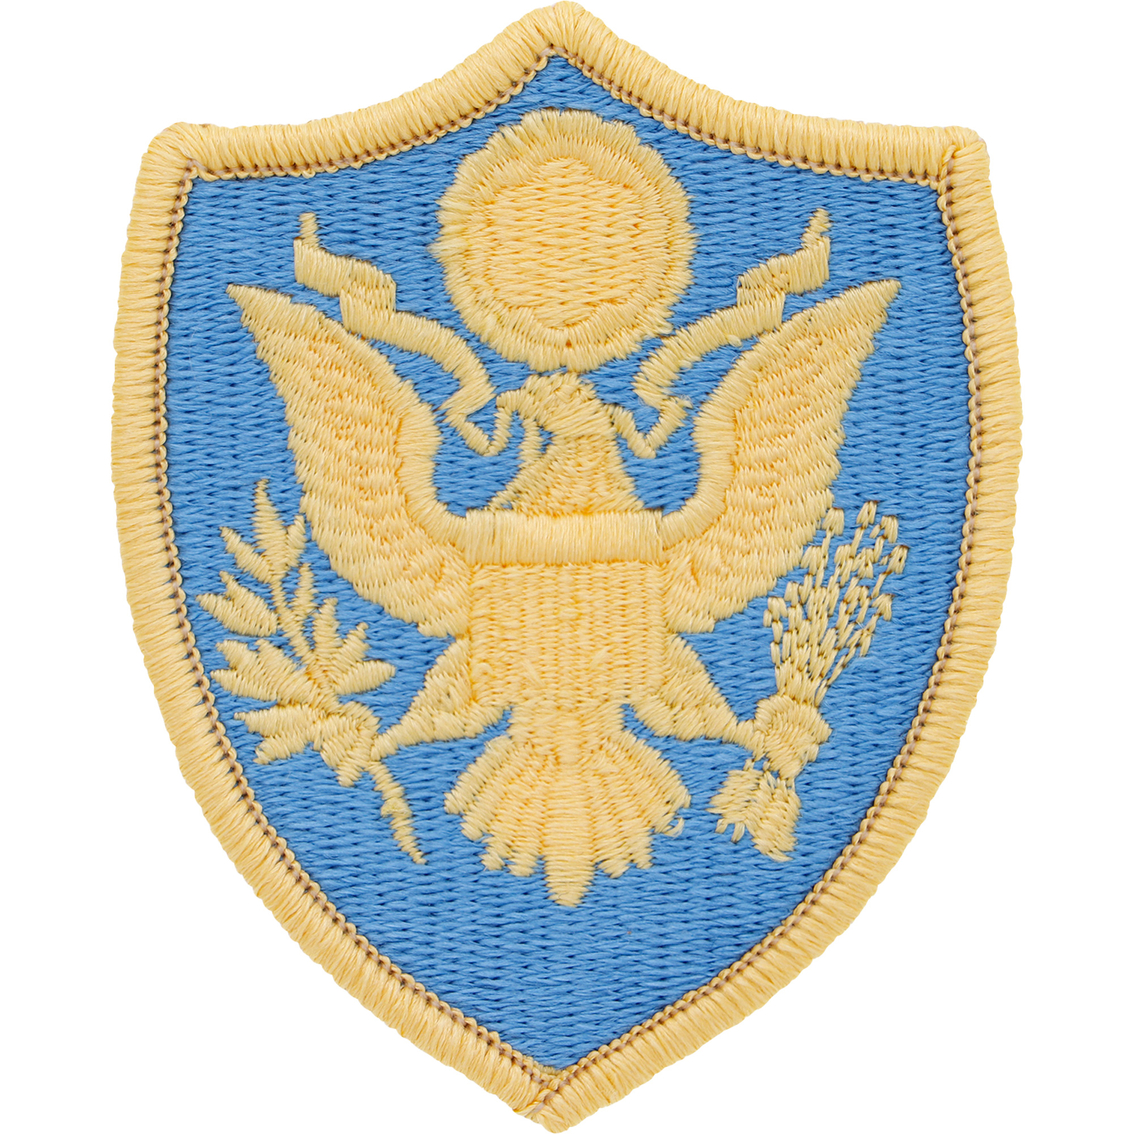 ACU 3RD PERSONNEL COMMAND PATCH